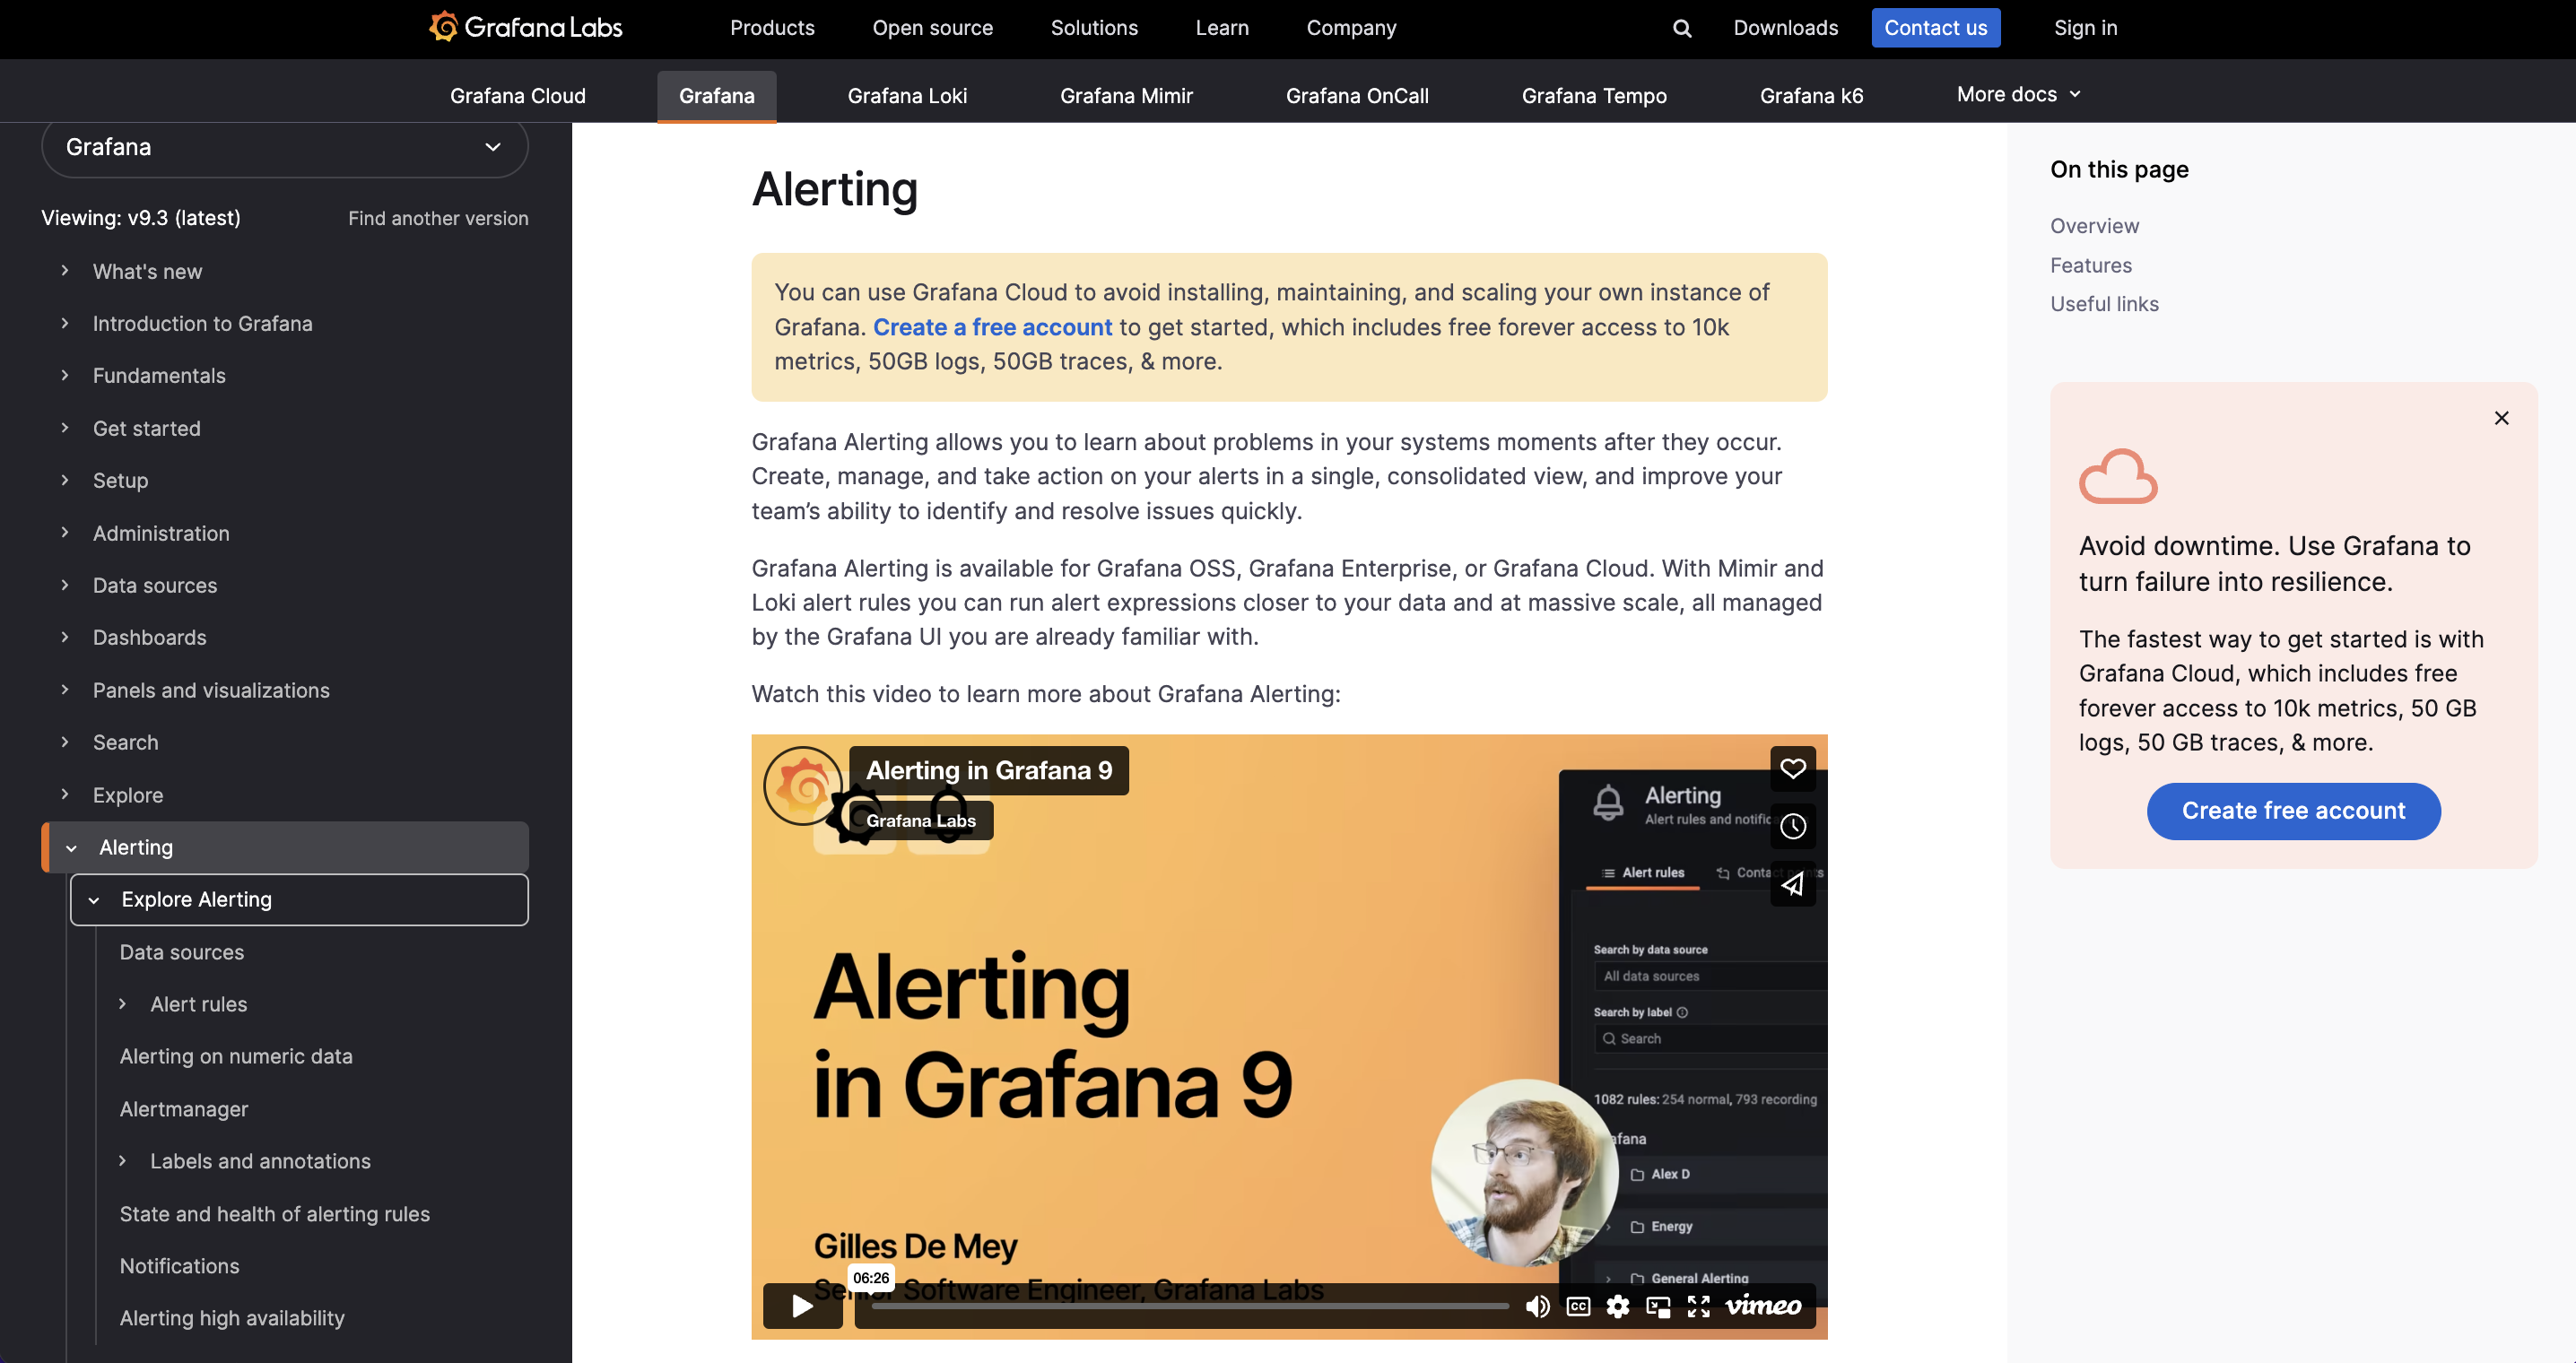 Grafana documentation: A look at the new and improved design